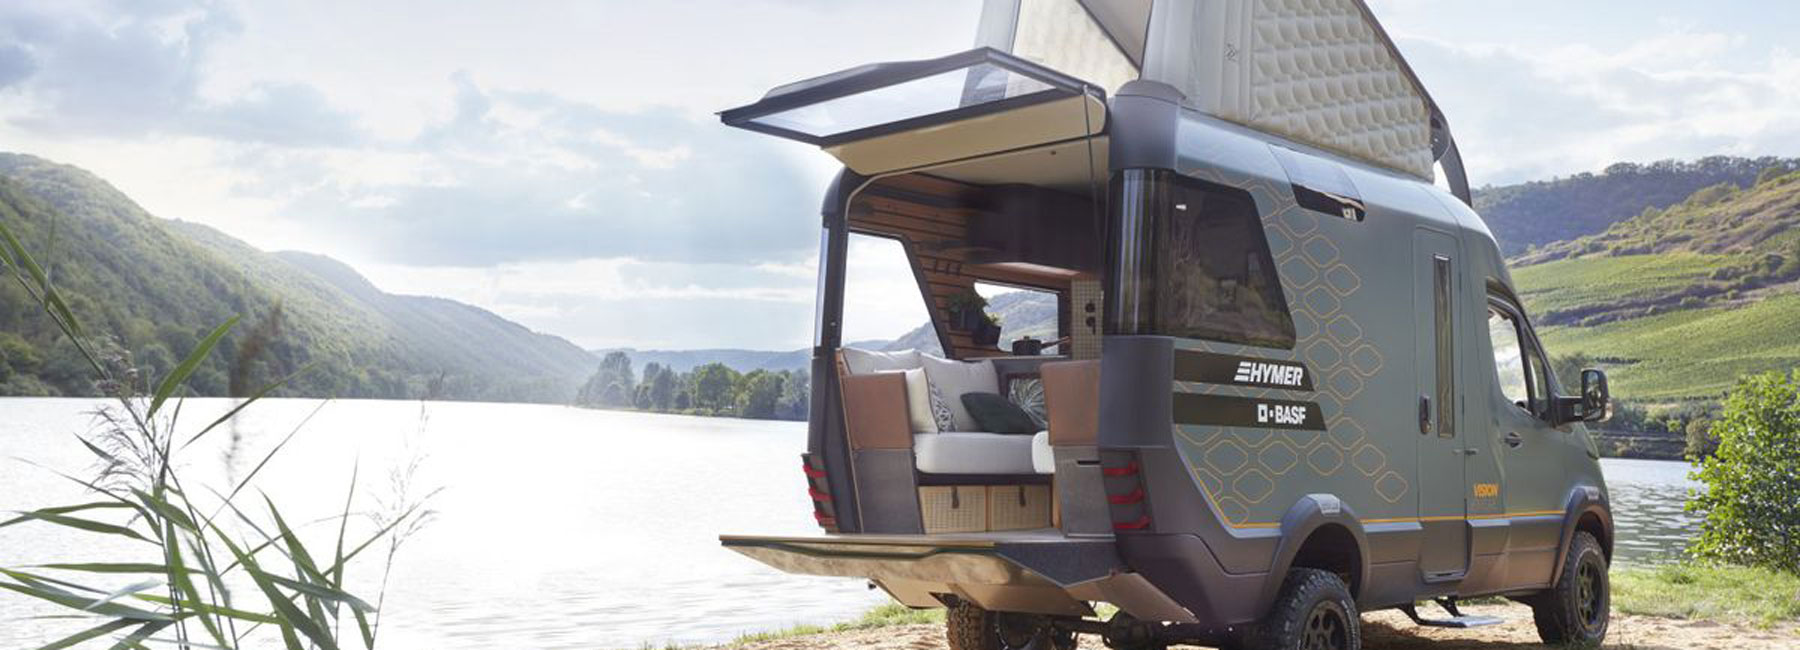 Hymer Visionventure Concept Is The Future Of Camper Vans